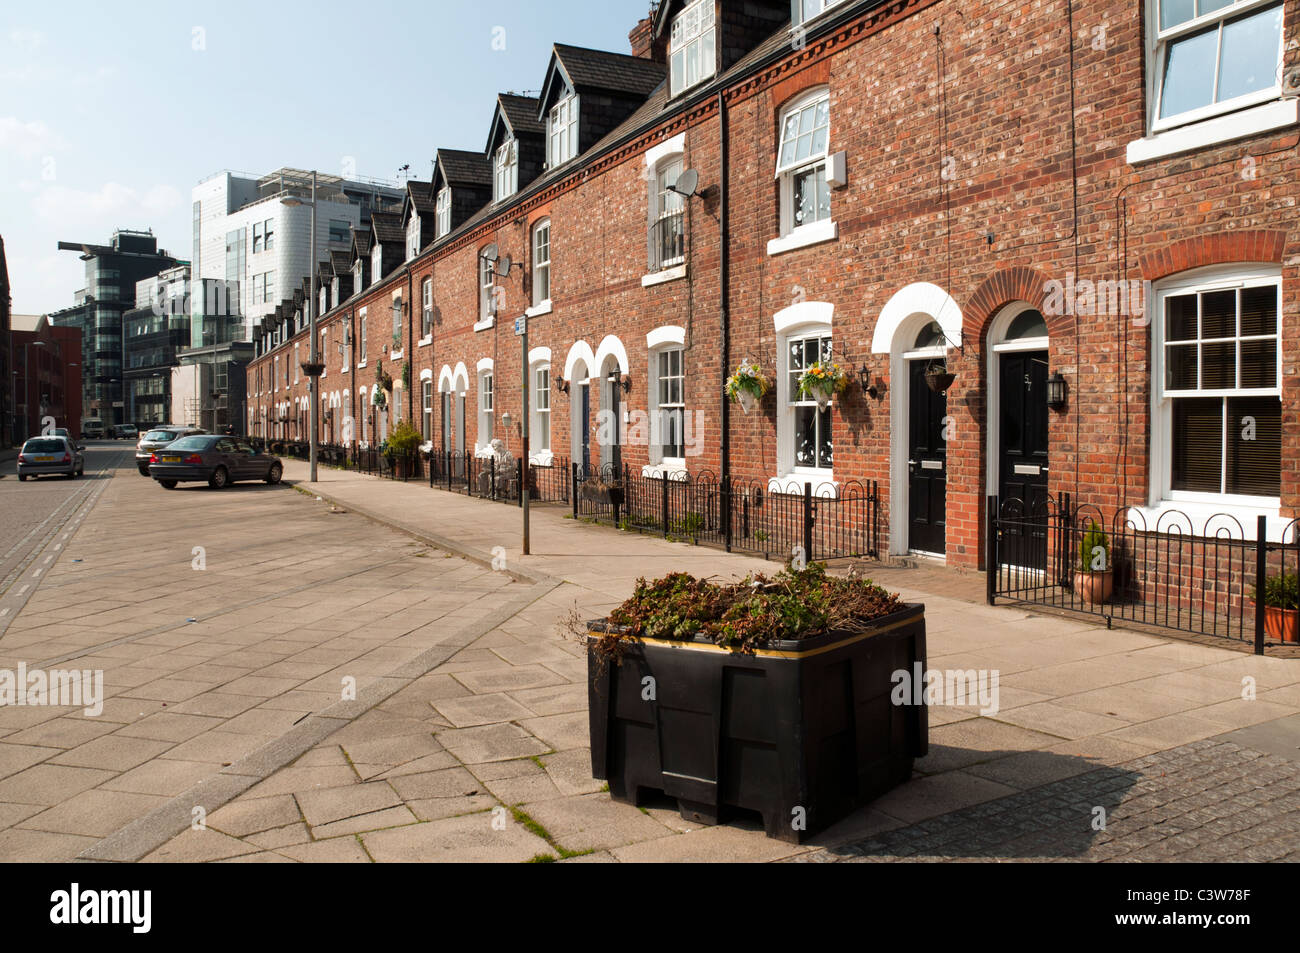 Restored late 19th century terraced houses, George Leigh St, Ancoats Urban Village, Northern Quarter, Manchester, England, UK. Stock Photo